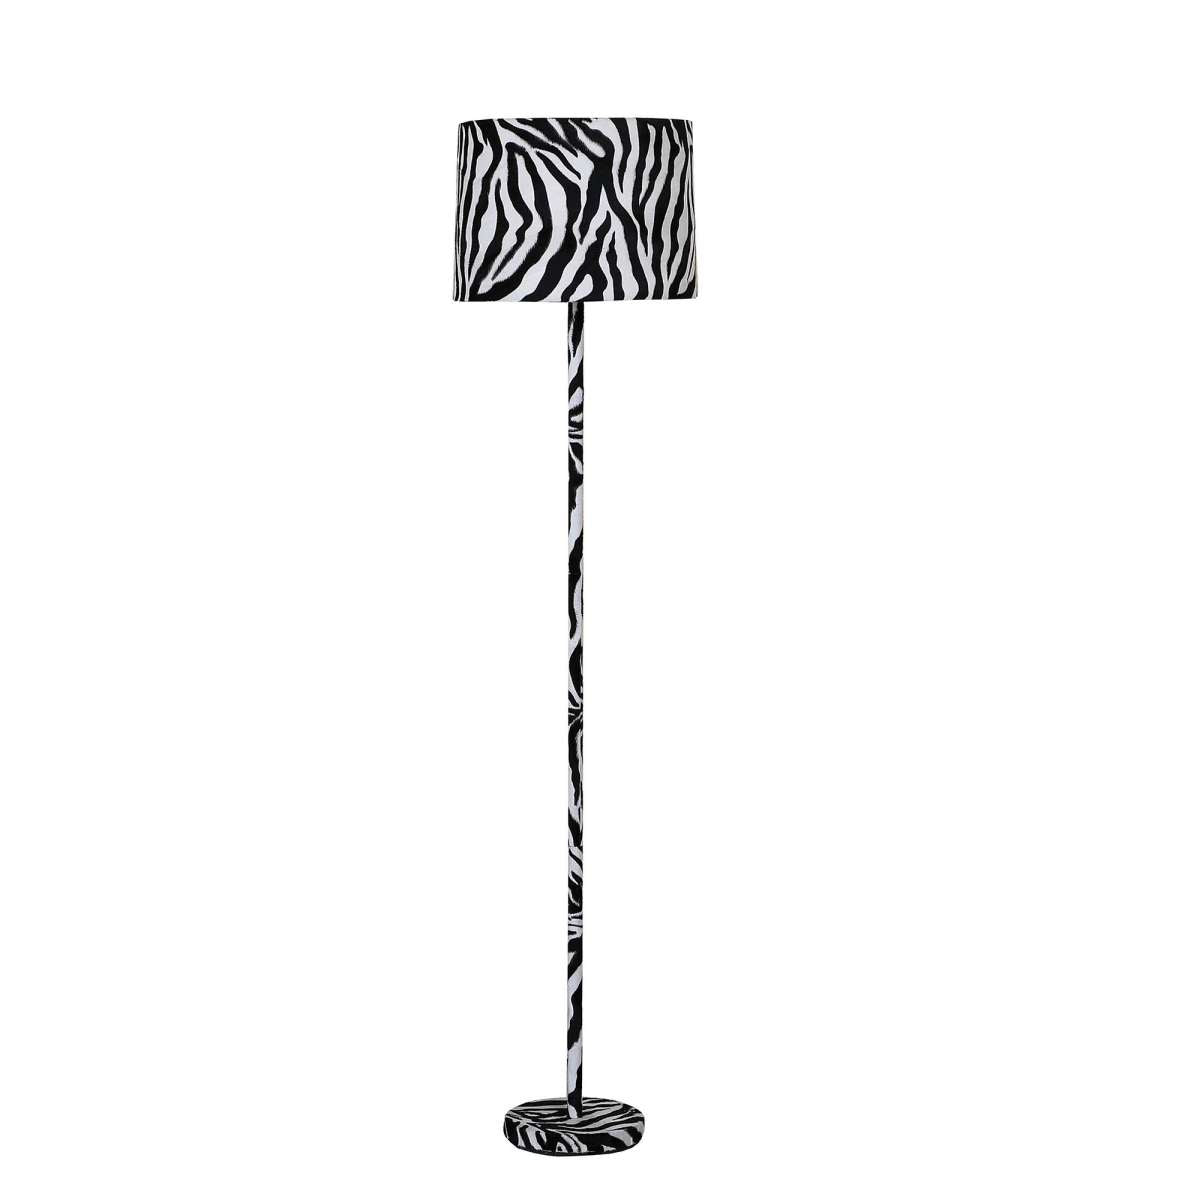 Fabric Wrapped Floor Lamp With Animal Print, White And Black By Benzara